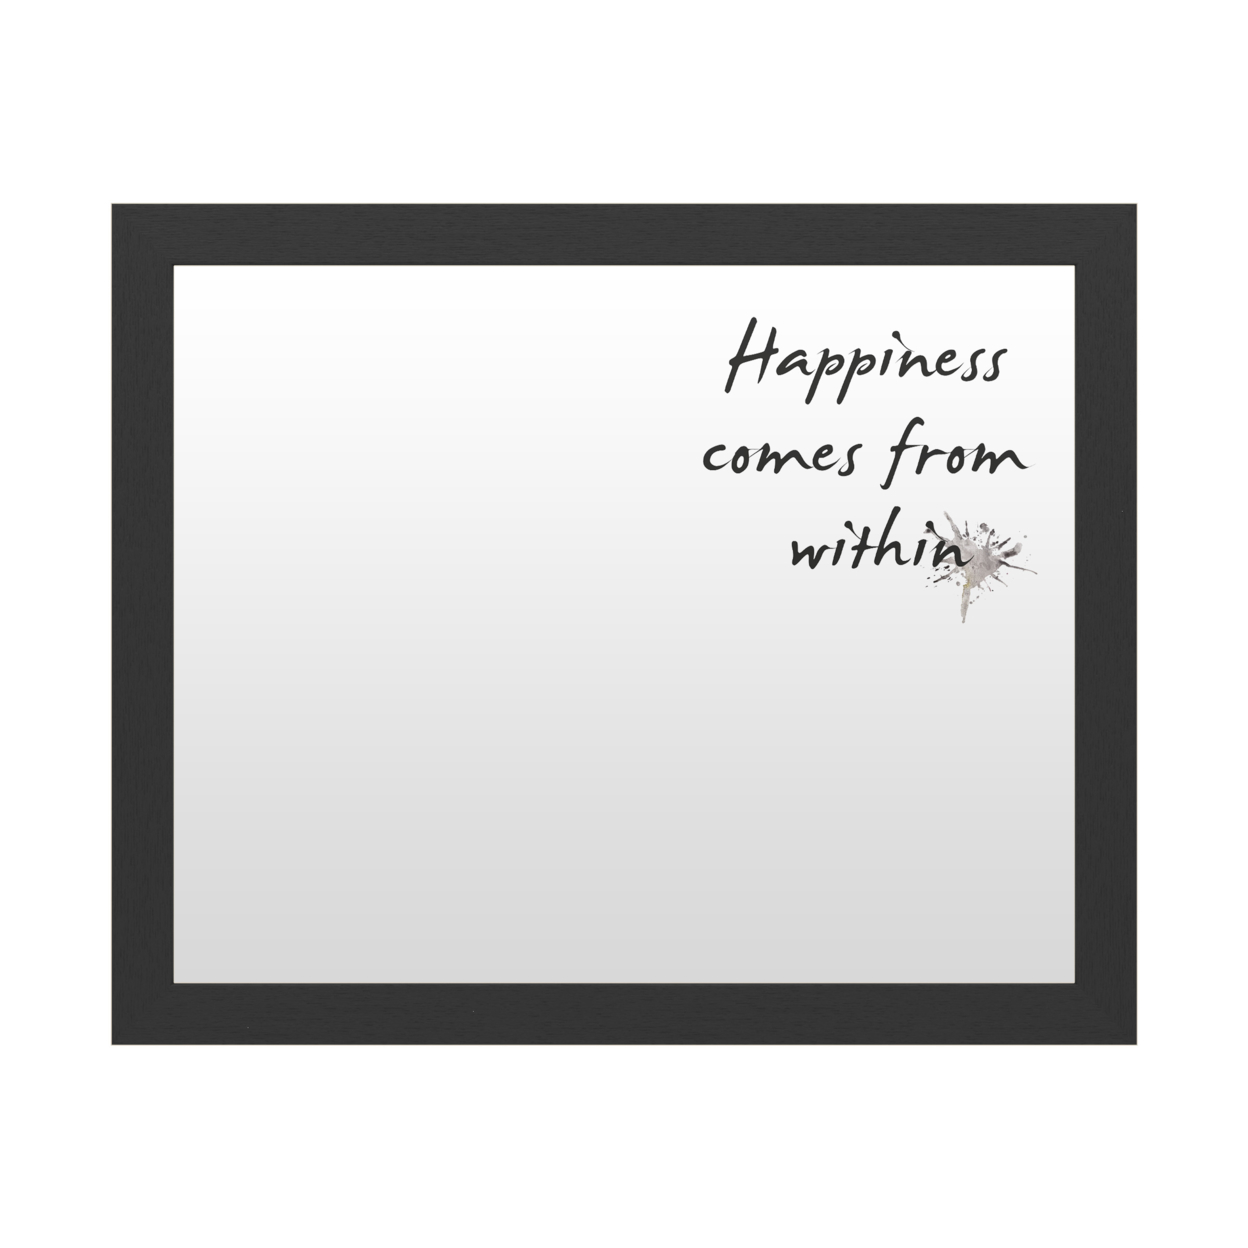 Dry Erase 16 X 20 Marker Board With Printed Artwork - Design Fabrikken Happiness Fabrikken White Board - Ready To Hang